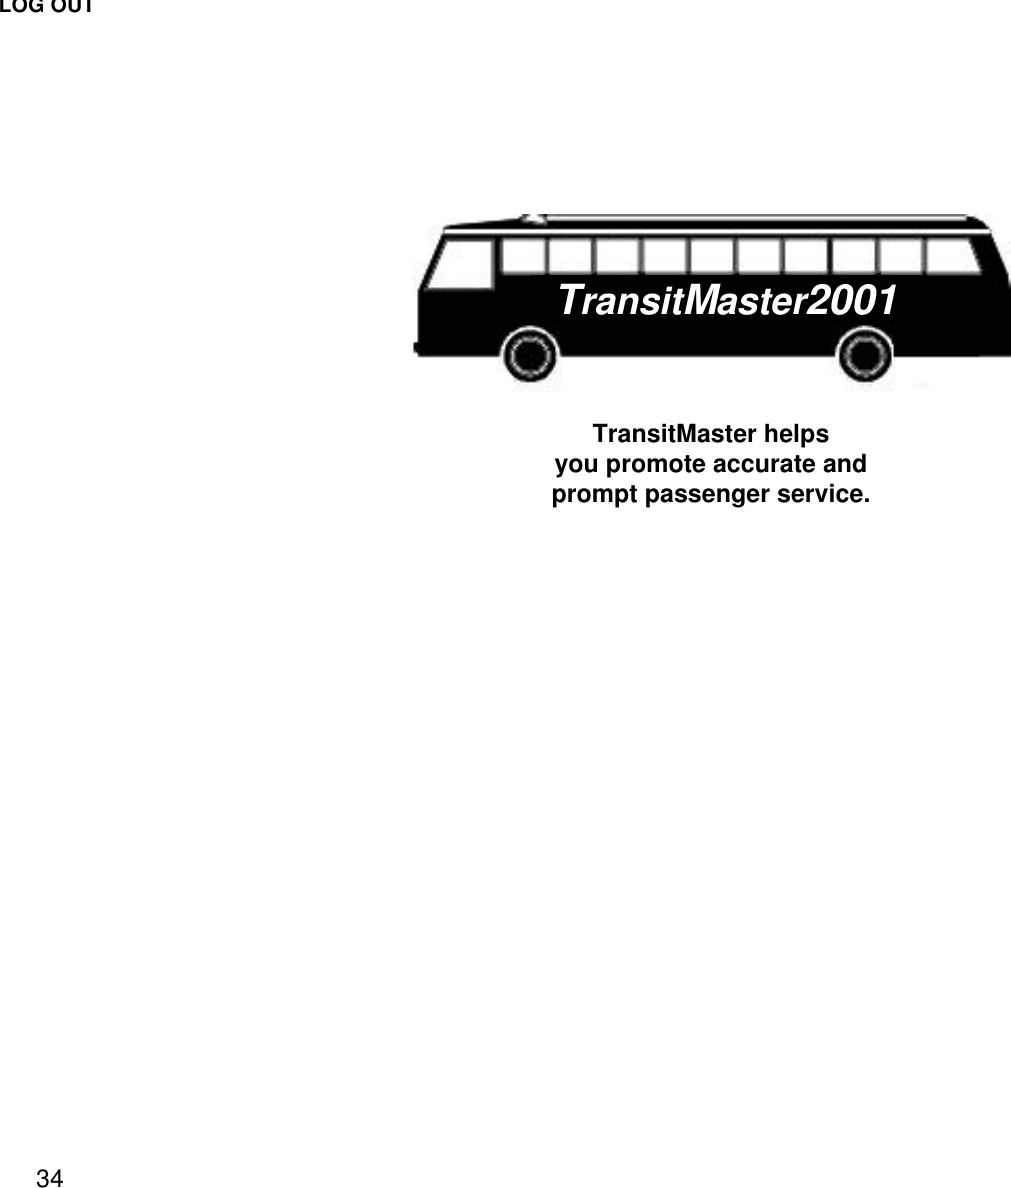 LOG OUT34TransitMaster helpsyou promote accurate andprompt passenger service.TransitMaster2001